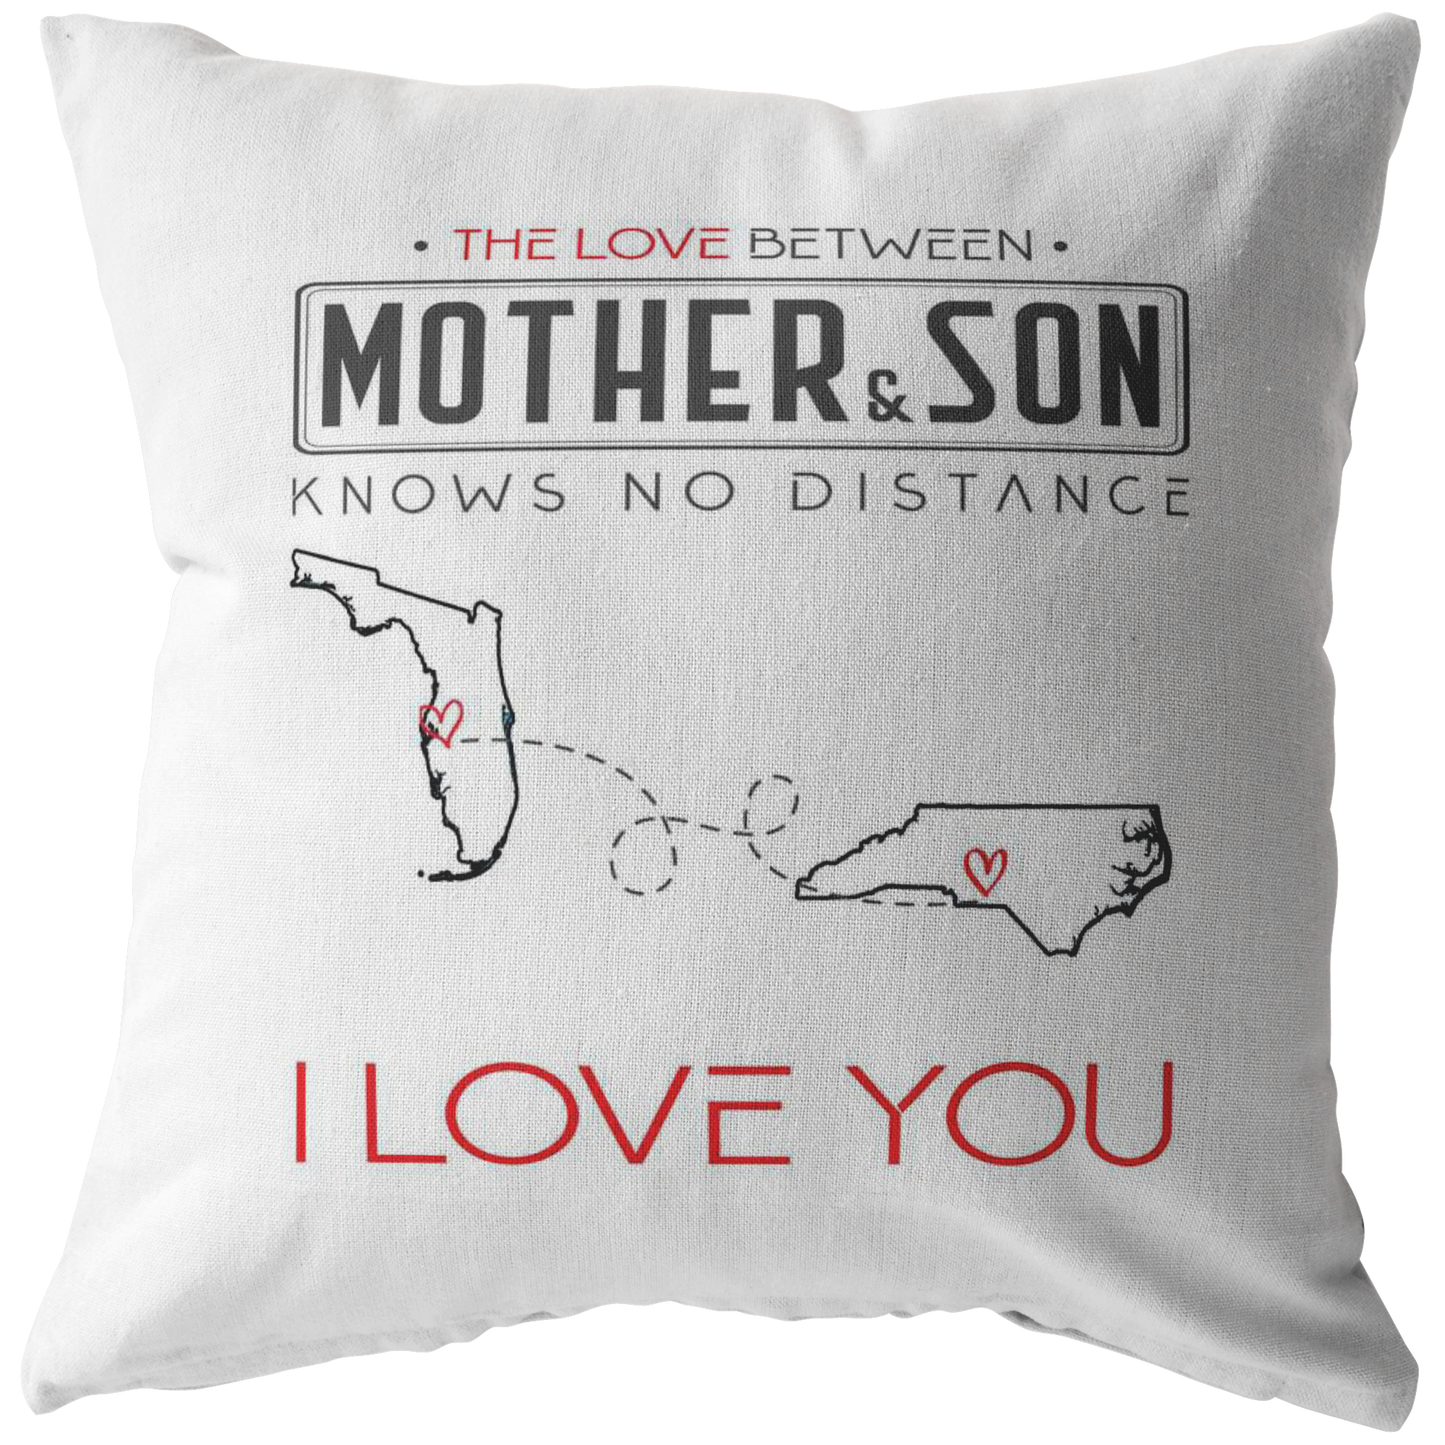 ND-pl20419710-sp-23260 - Mothers Day Gifts For Mom - The Love Between Mother  Son K